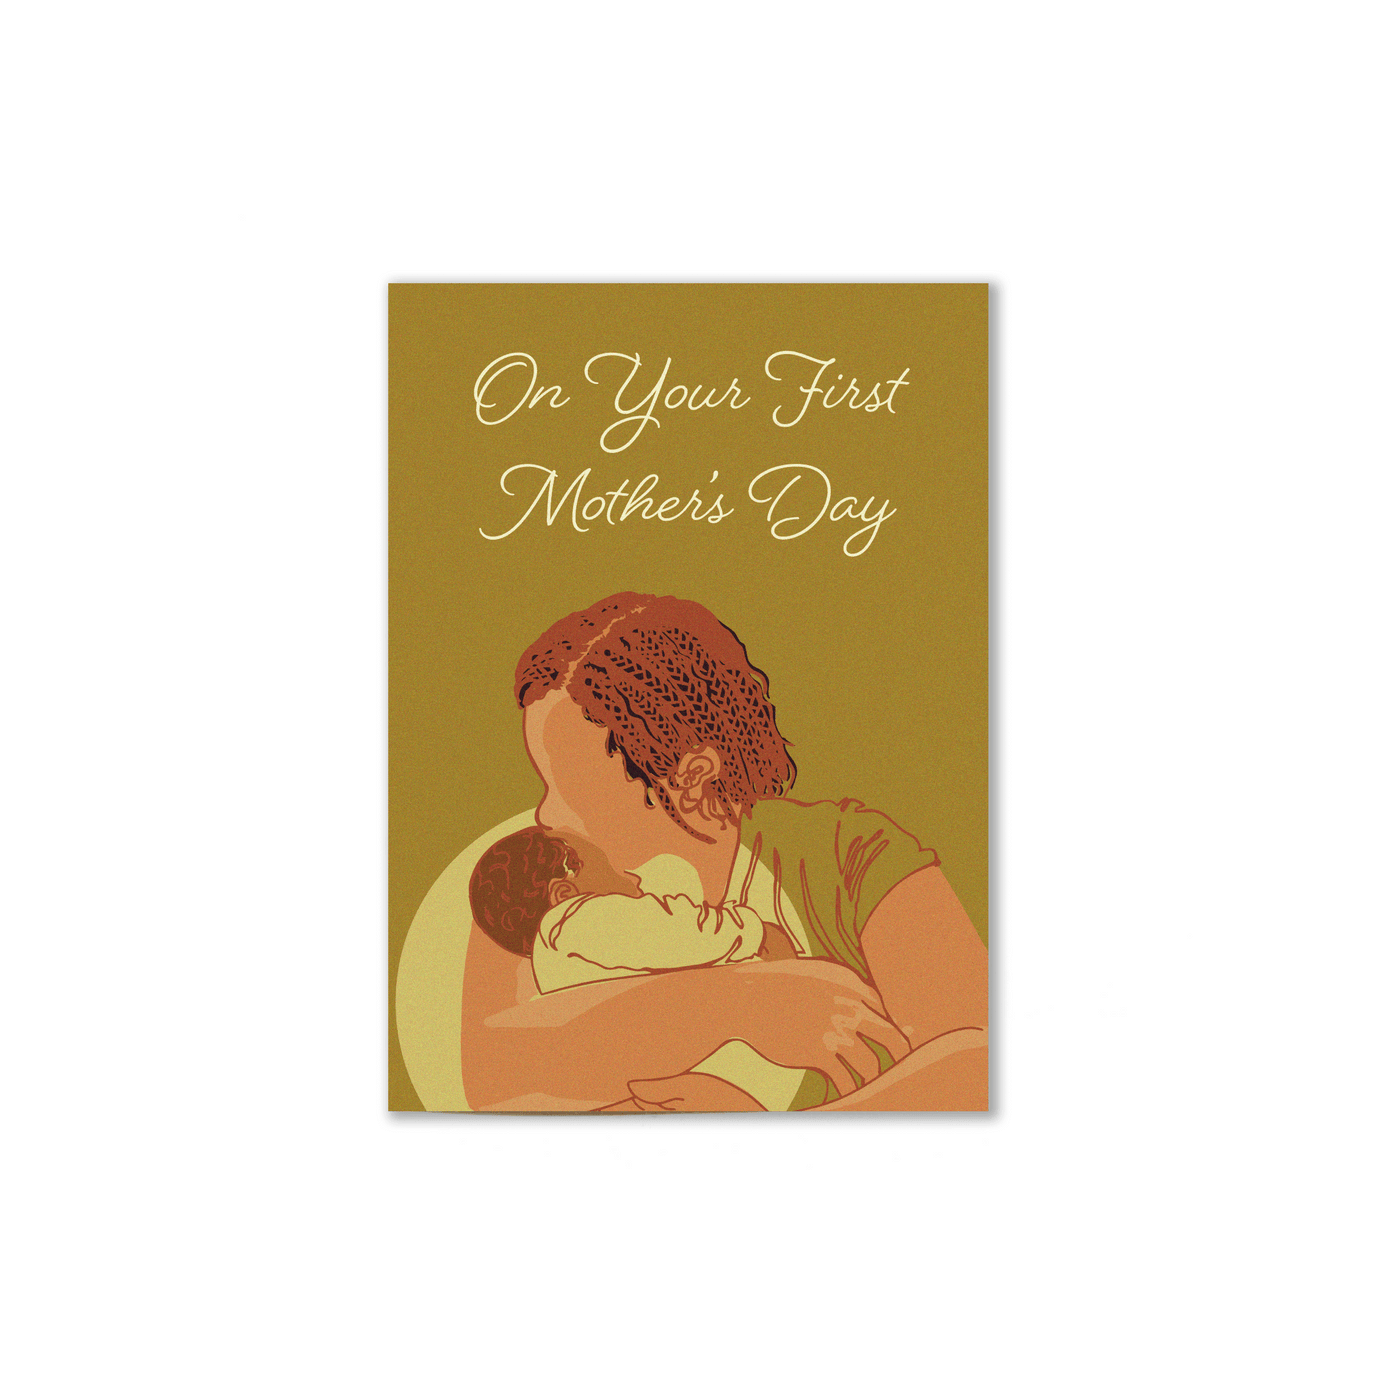 yellow and brown toned first mothers day card that reads "On your first mother's day" with an illustration of a mother holding her baby in close